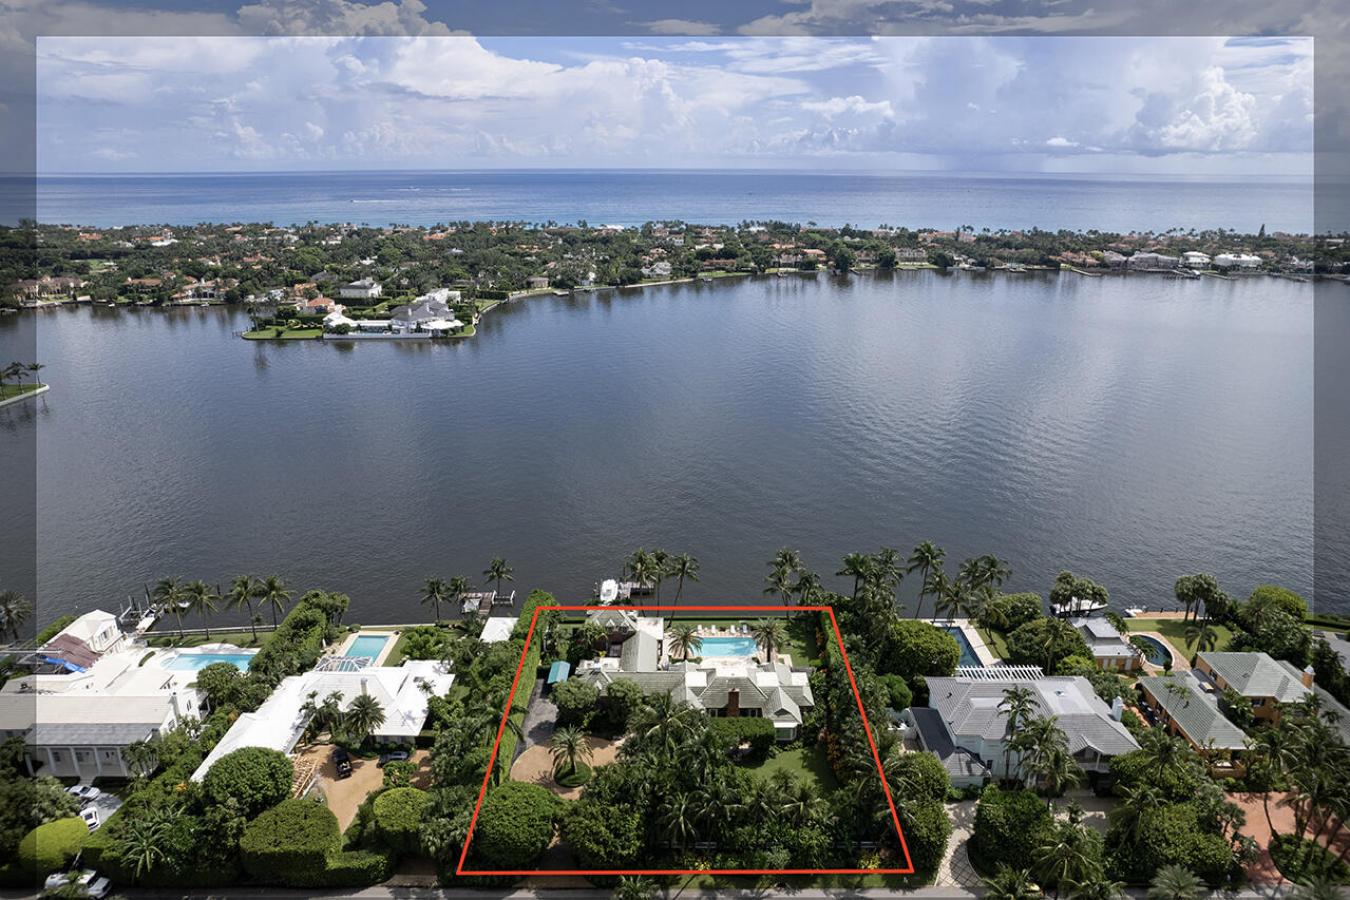 690 Island Drive, Palm Beach, Florida, 33480, United States, 7 Bedrooms Bedrooms, ,6 BathroomsBathrooms,Residential,For Sale,690 Island Drive,1490522